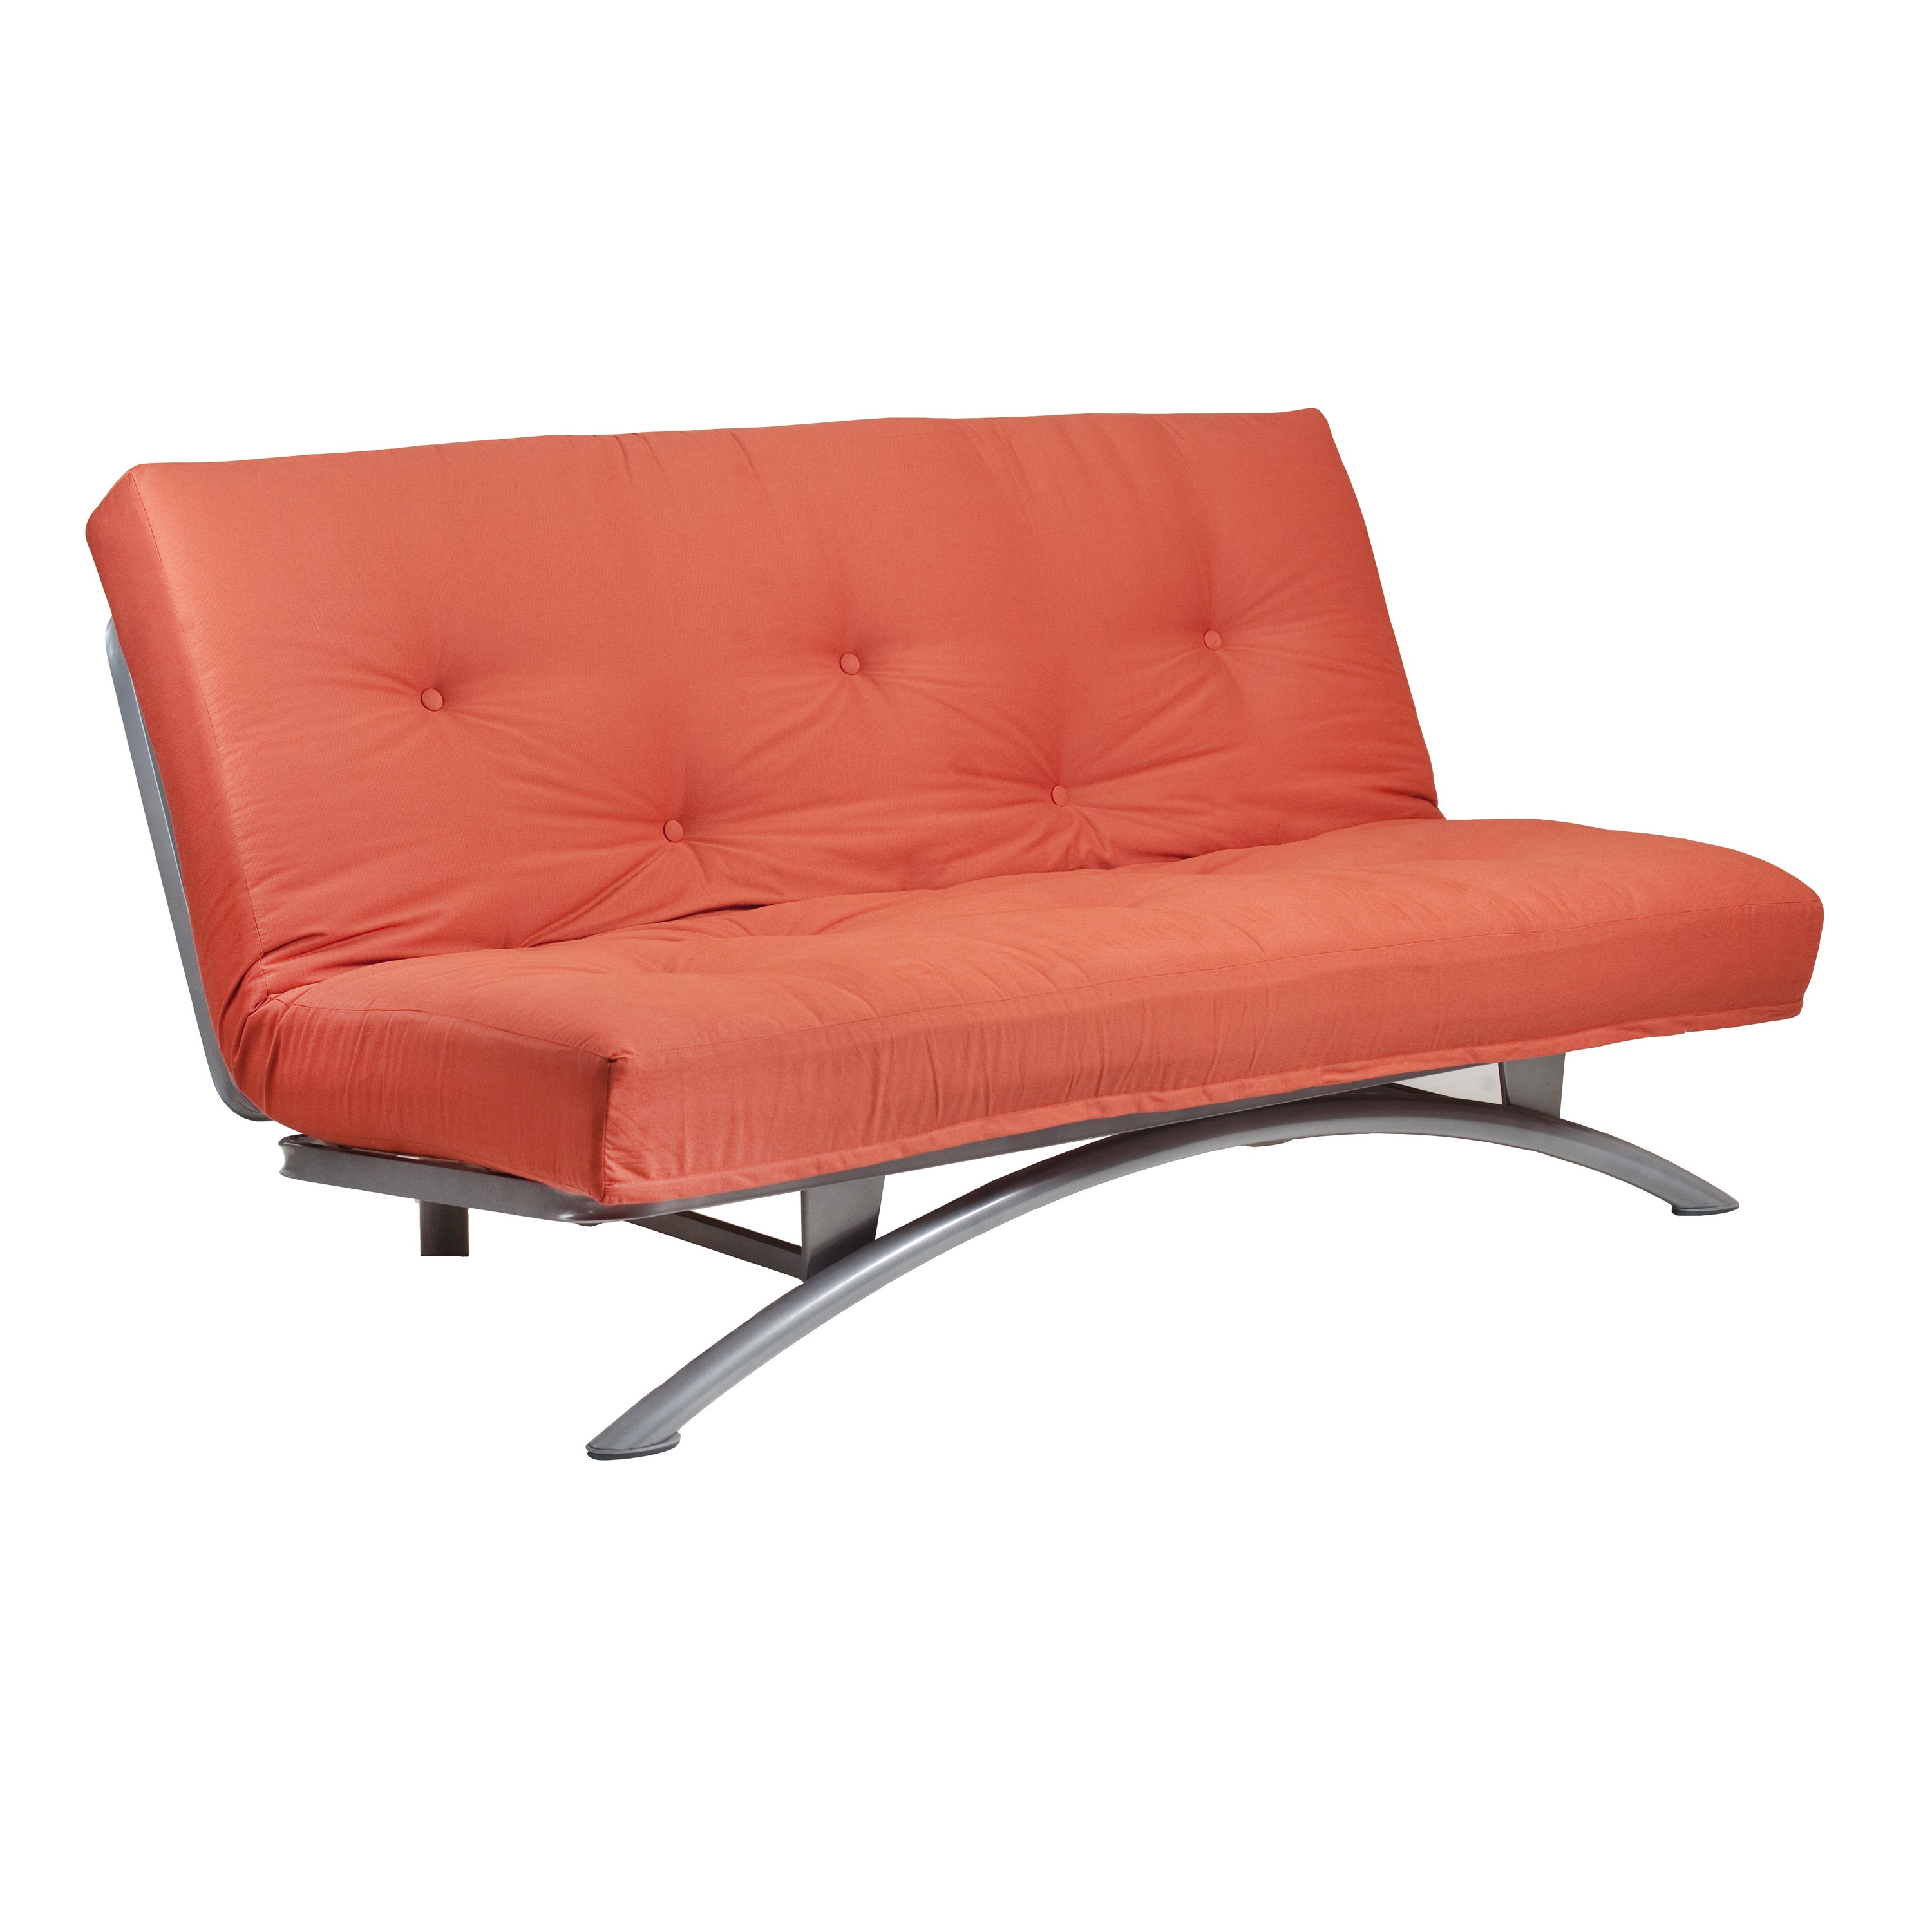 Read more about the article The Clic-Clac Futon frame